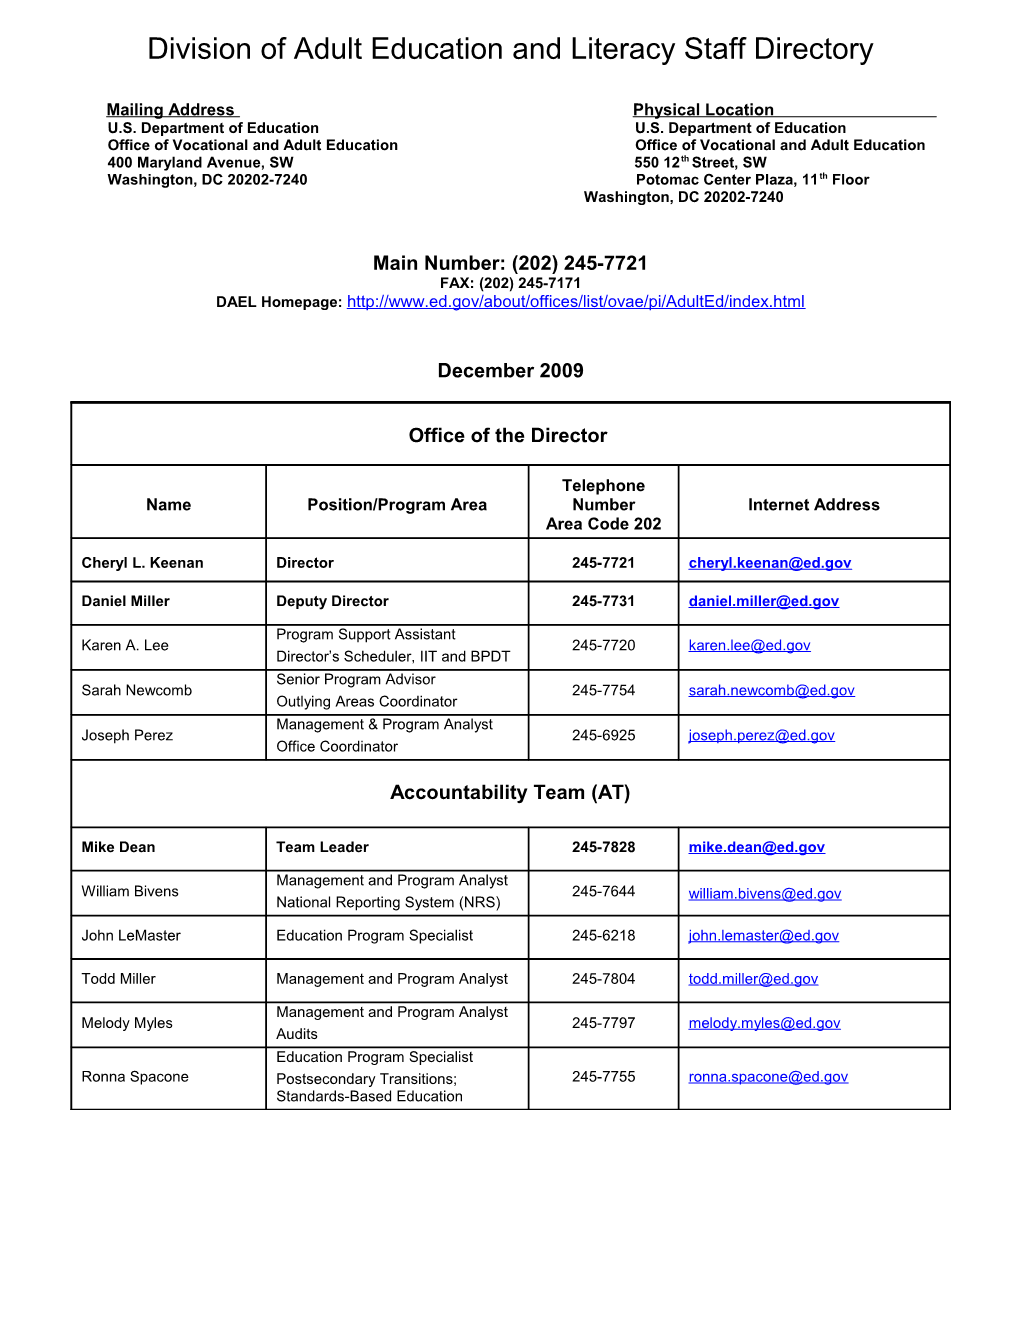 Division of Adult Education and Literacy Staff Directory